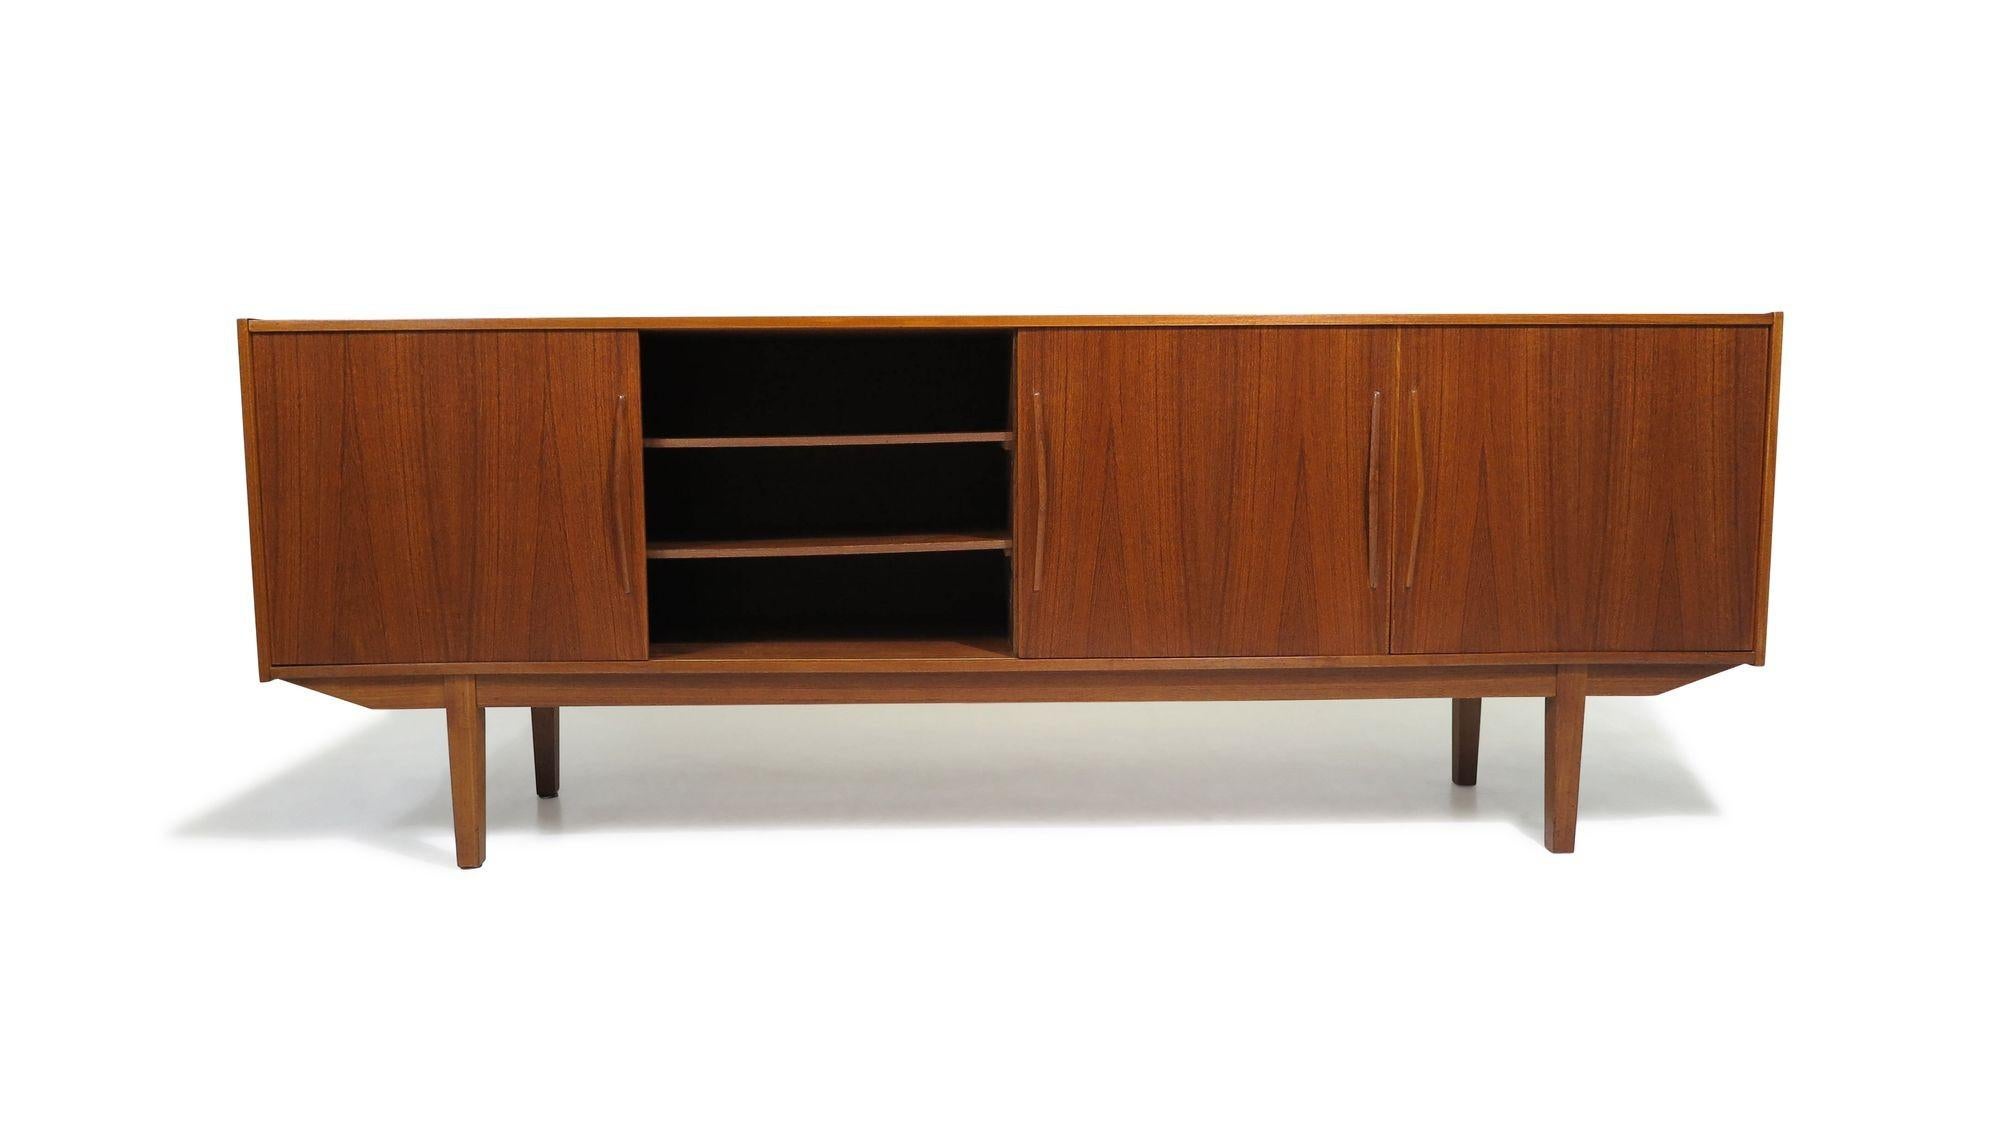 1960's Mid-century Danish Teak Credenza with Doors and Drawers In Excellent Condition For Sale In Oakland, CA